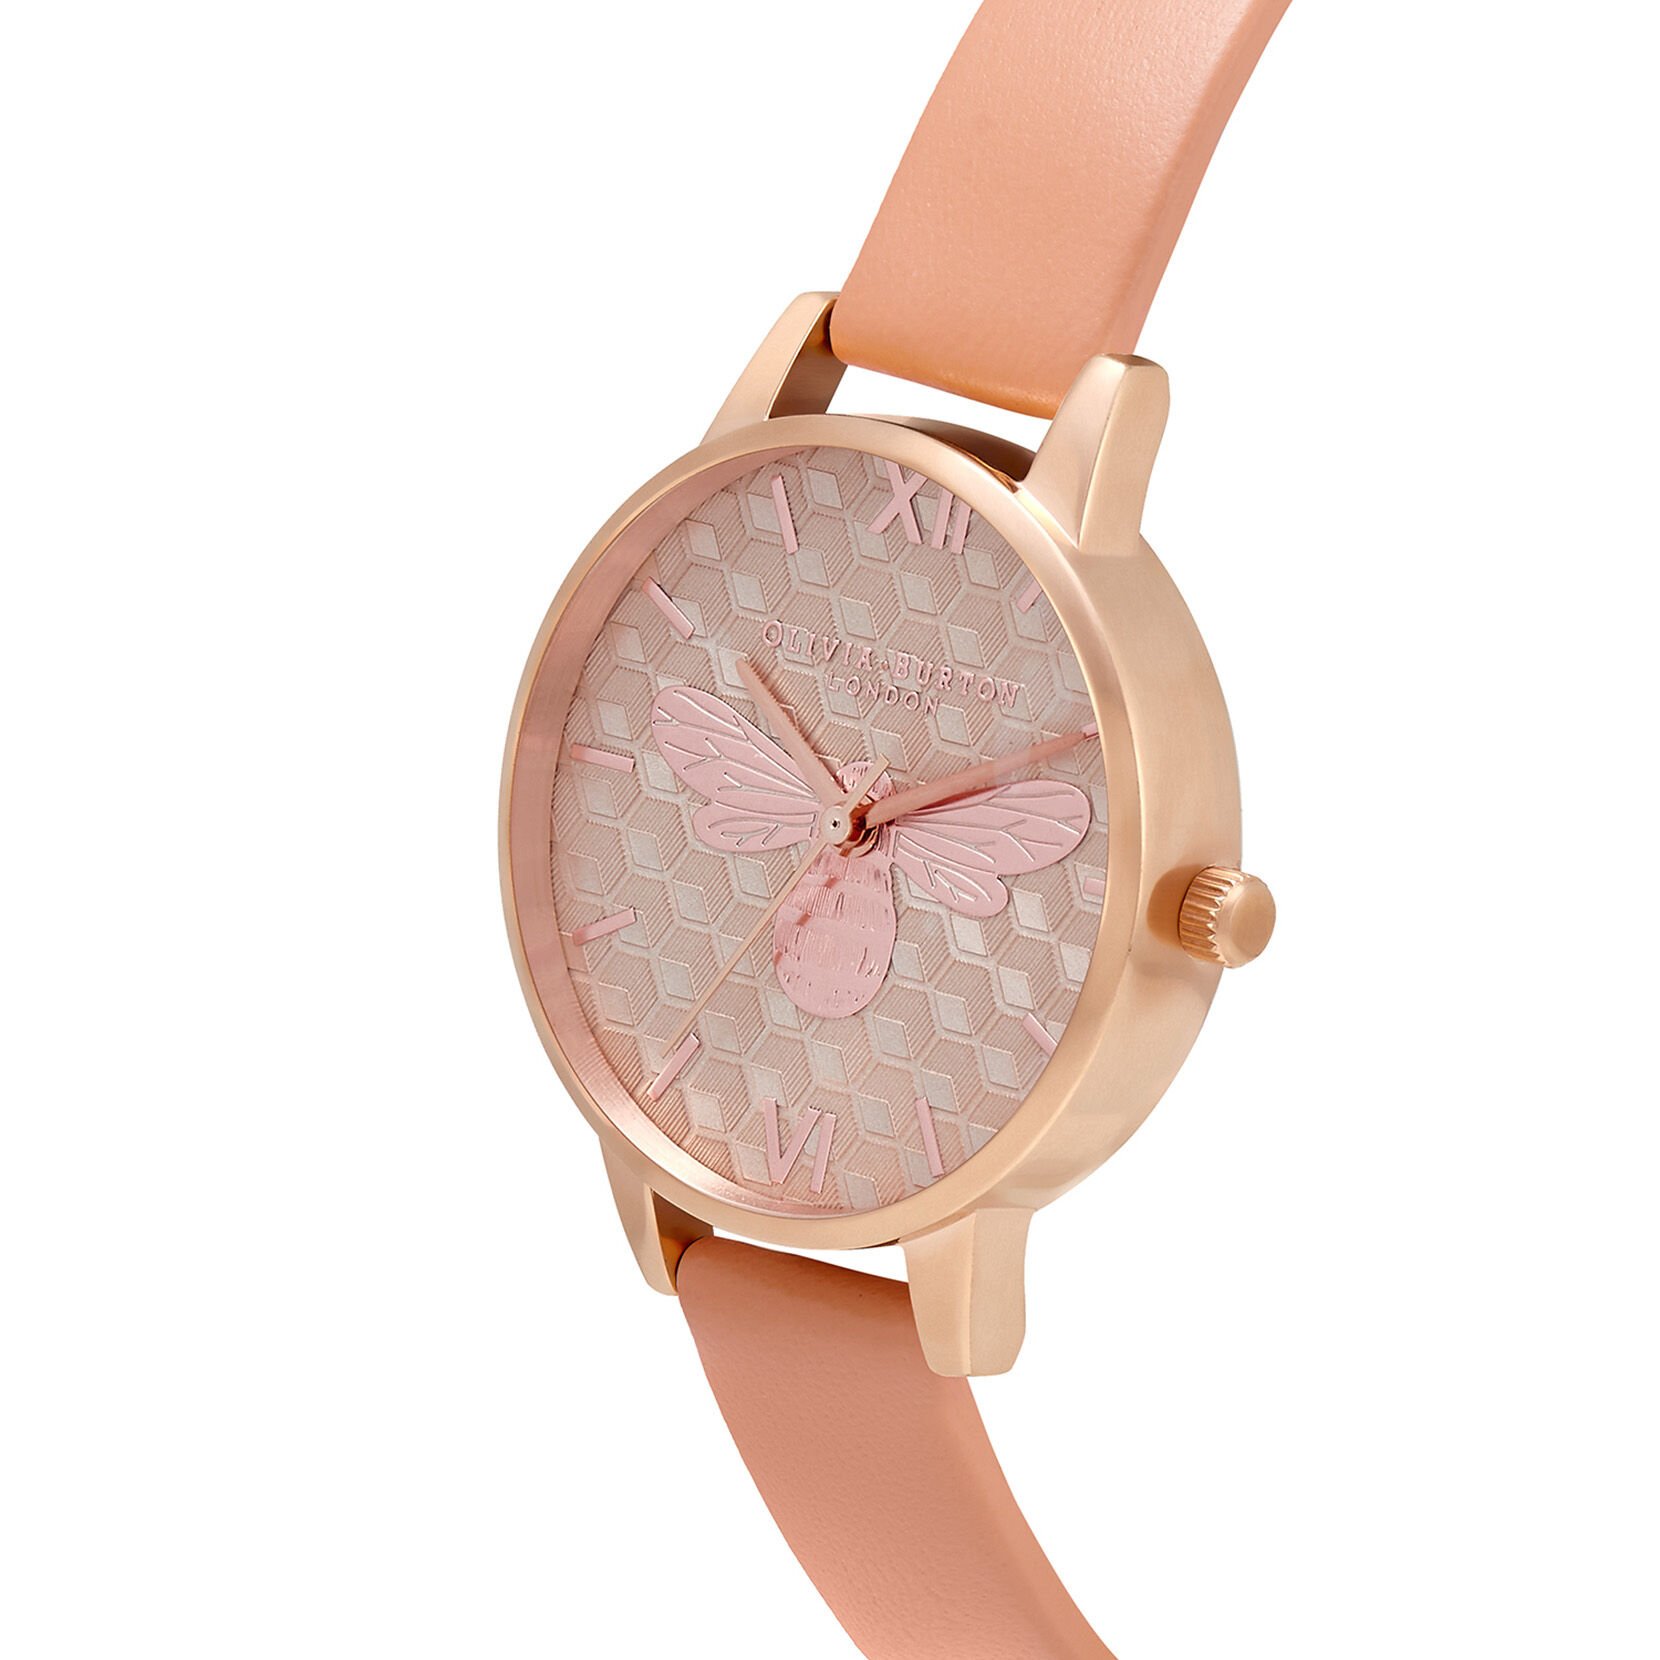 30mm Rose Gold & Tan Leather Strap Watch